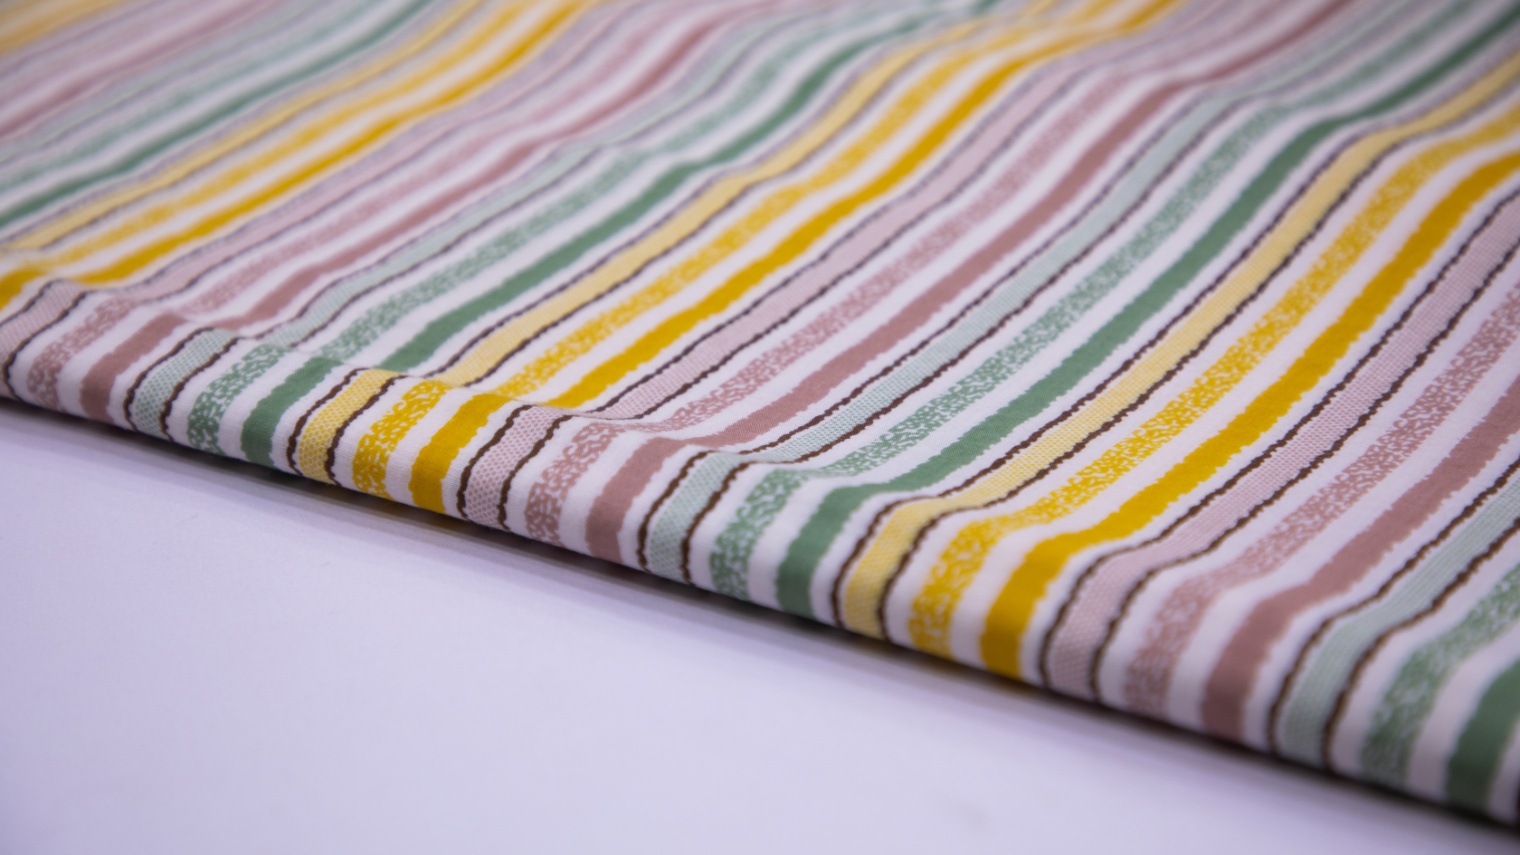 DUSTY GREEN & YELLOW COLOR COTTON SCREEN PRINT JAIPURI ABSTRACT STRIPES FABRIC - 5746